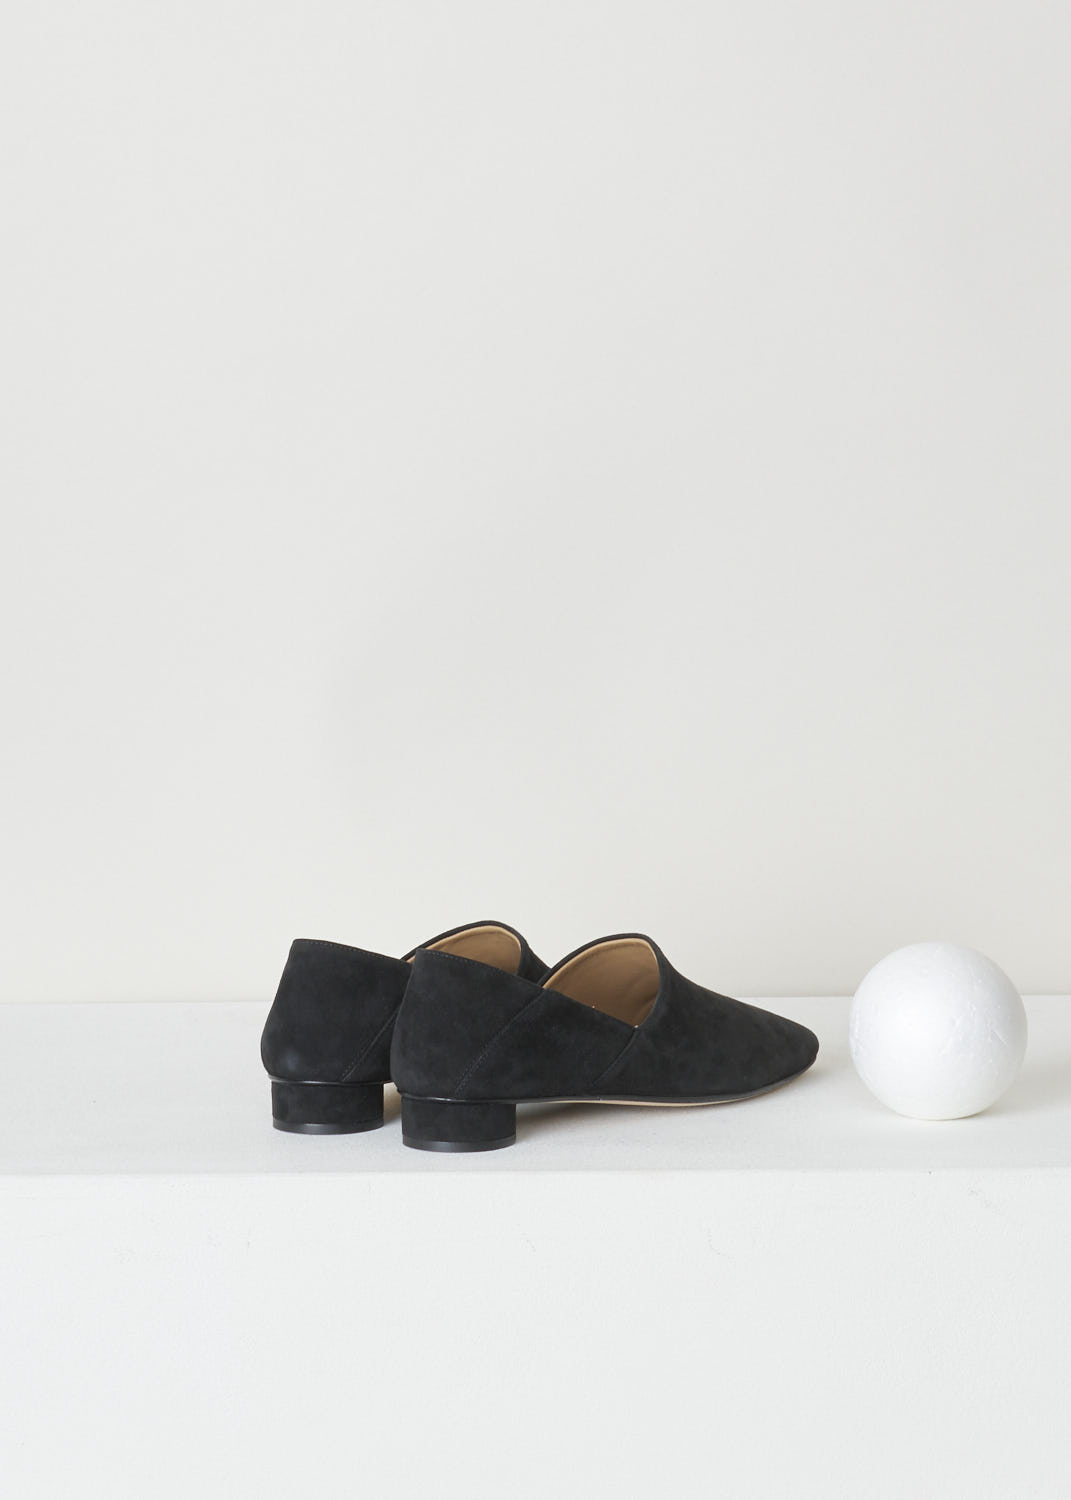 THE ROW, BLACK SUEDE SLIPPER, NOELLE_F1000_L25_BLK, Black, Back, Minimalistic black suede slipper. The slip-in model features a rounded toe vamp. The sober design is exactly what makes these shoes so beautiful.
